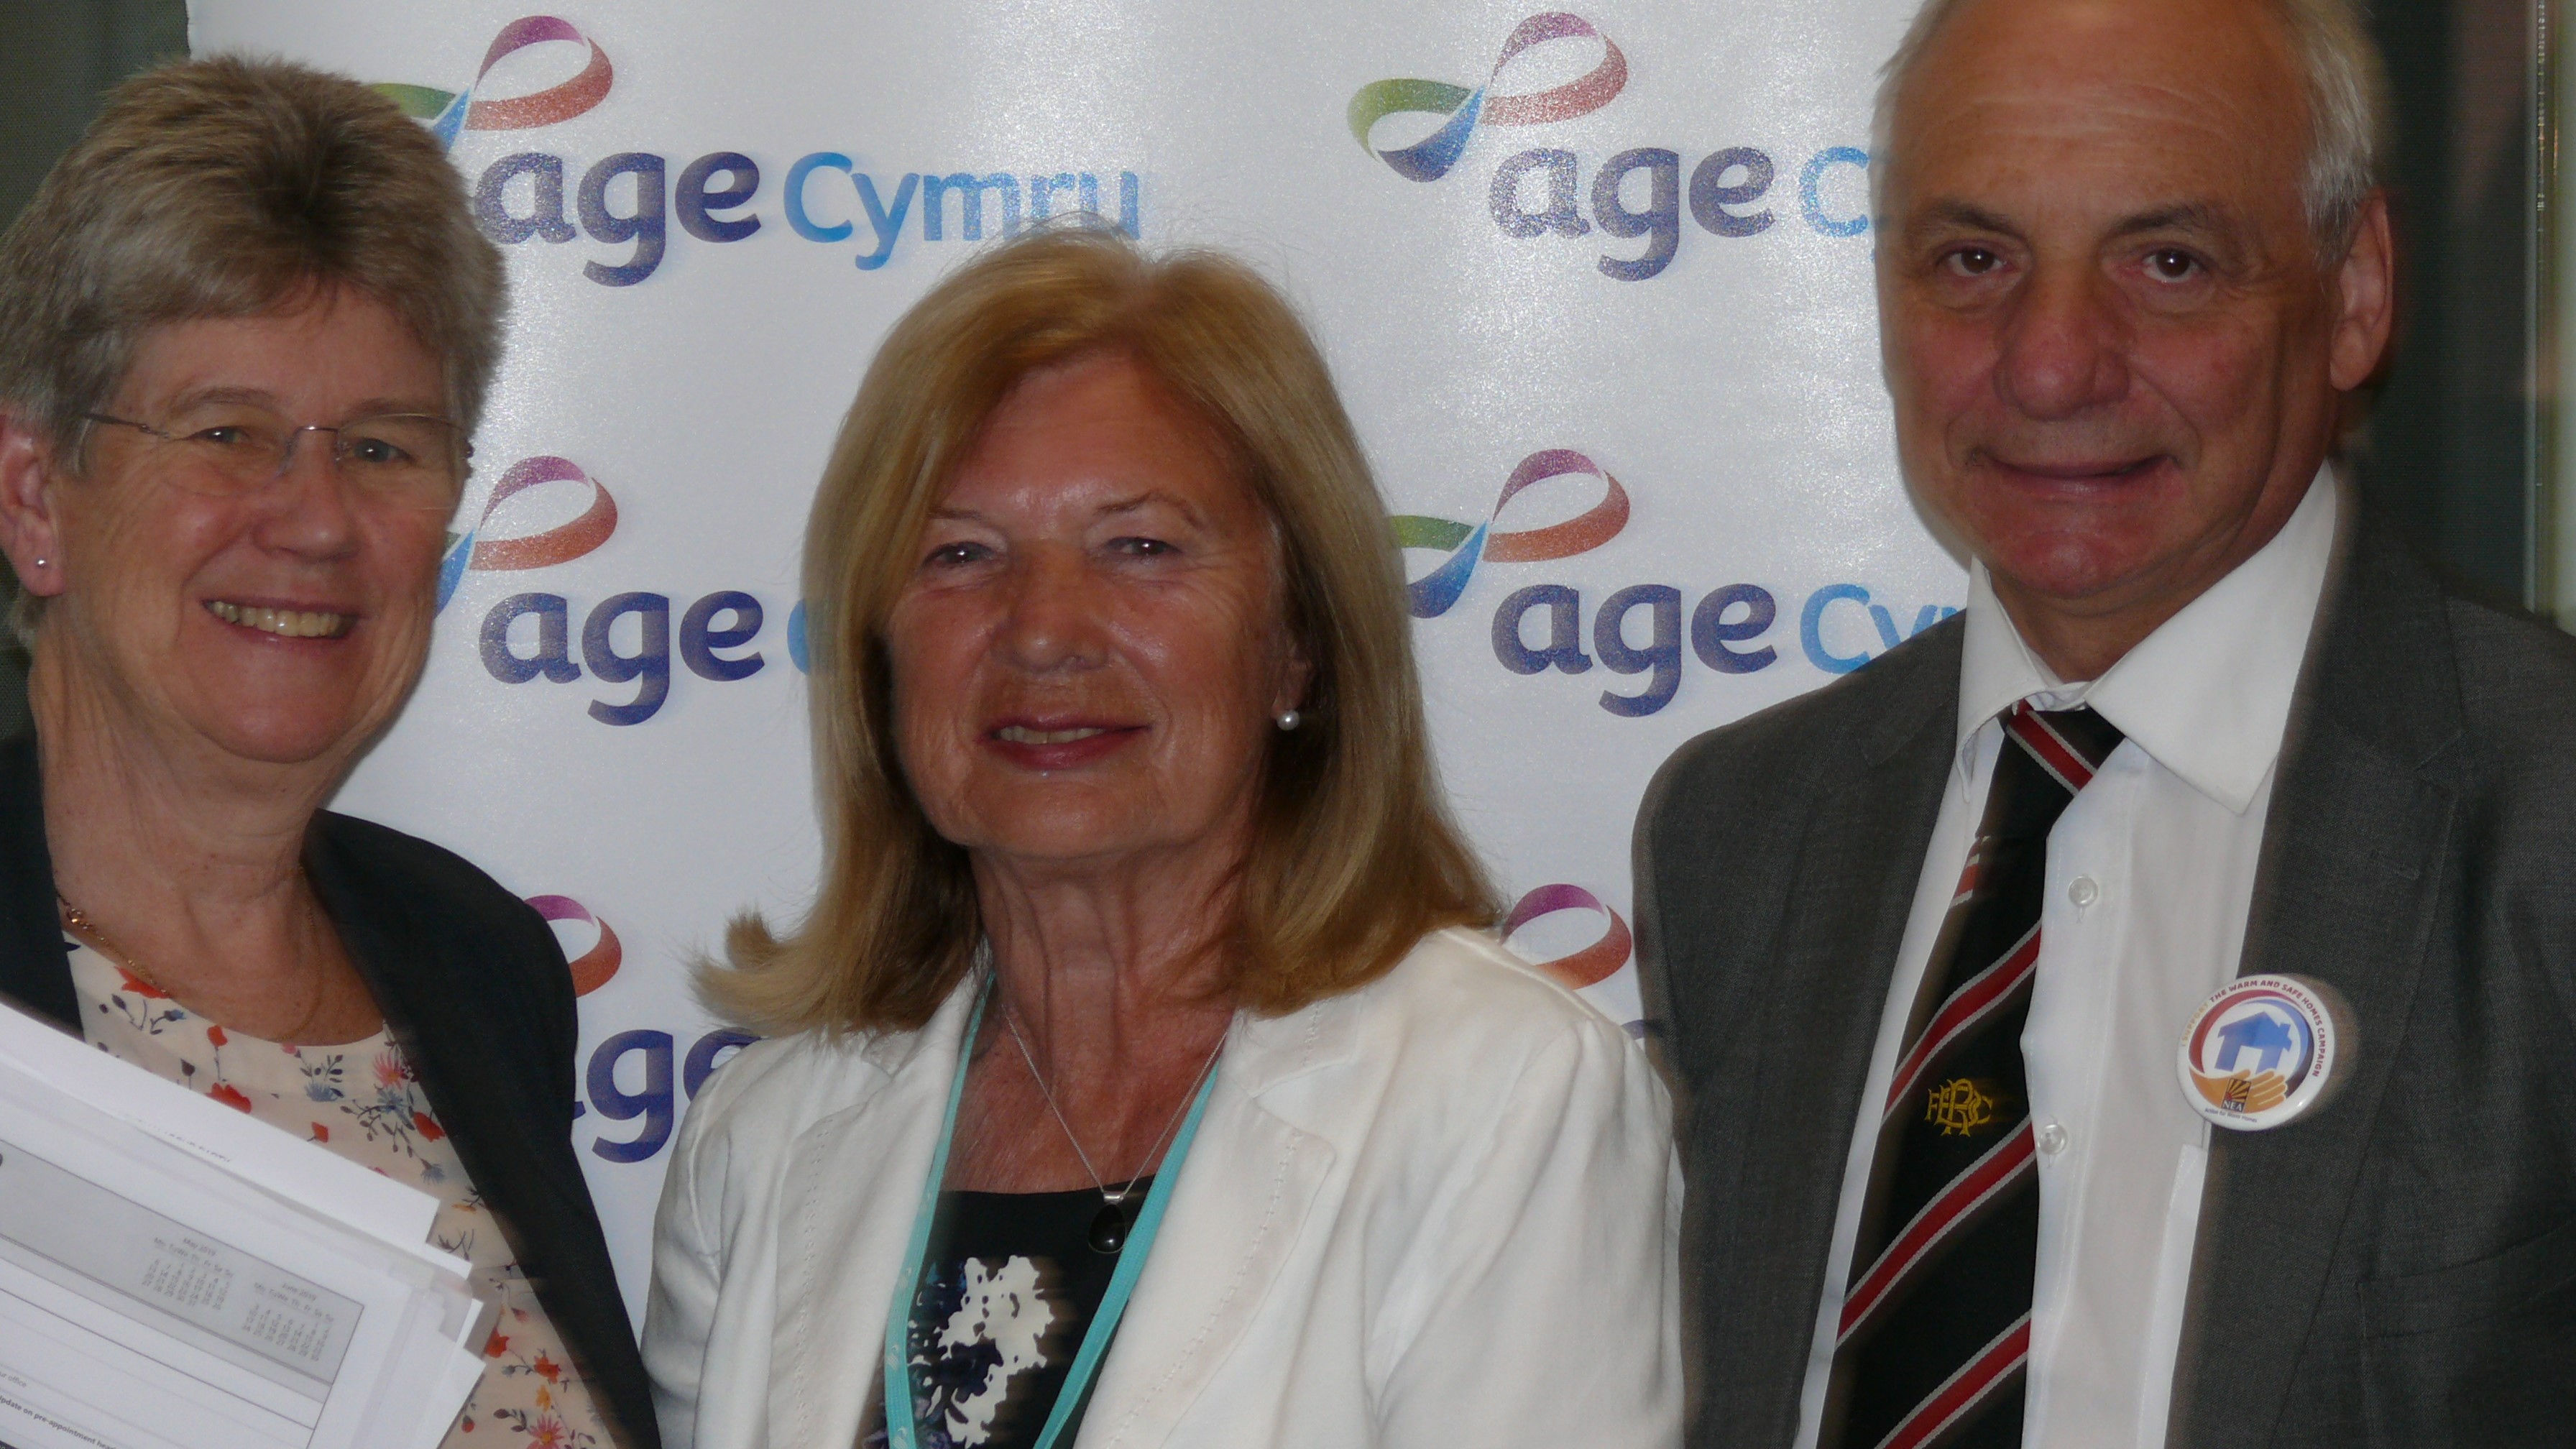 Deputy Minister and Chief Whip Jane Hutt AM, Dr Bernadette Fuge OBE President of Age Cymru, and Mike Hedges AM Chair of the Cross Party Group on Older People and Ageing